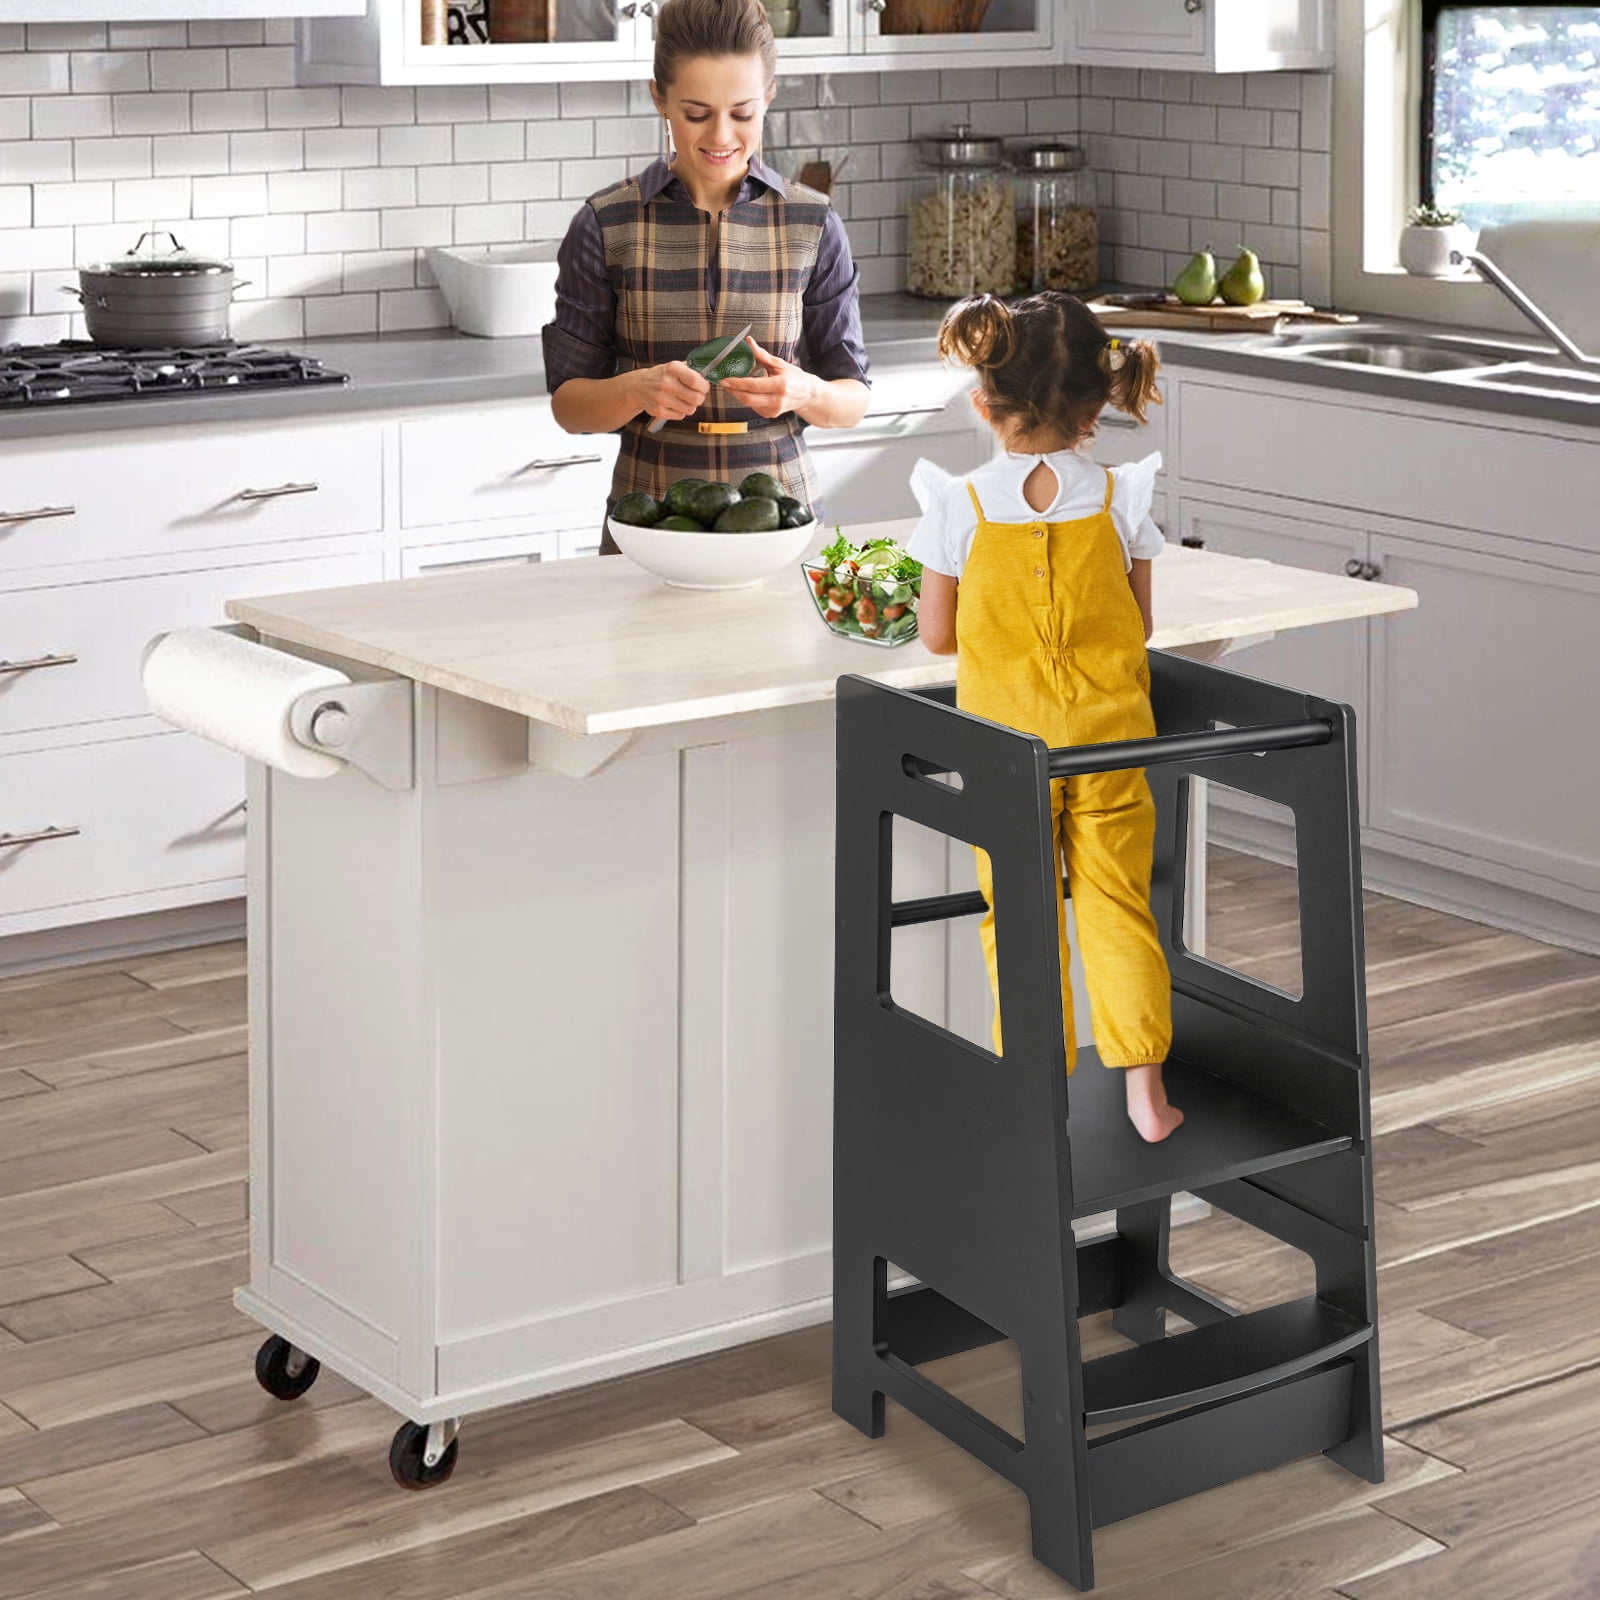 Toddler Stepping Stool Child Standing Tower with Non-Slip Mat for Bathroom Sink 16 L x 19 W x 28 H Kitchen Step Stool Toddler Tower Wooden Step Stool Kids Learning Helper with Handles 